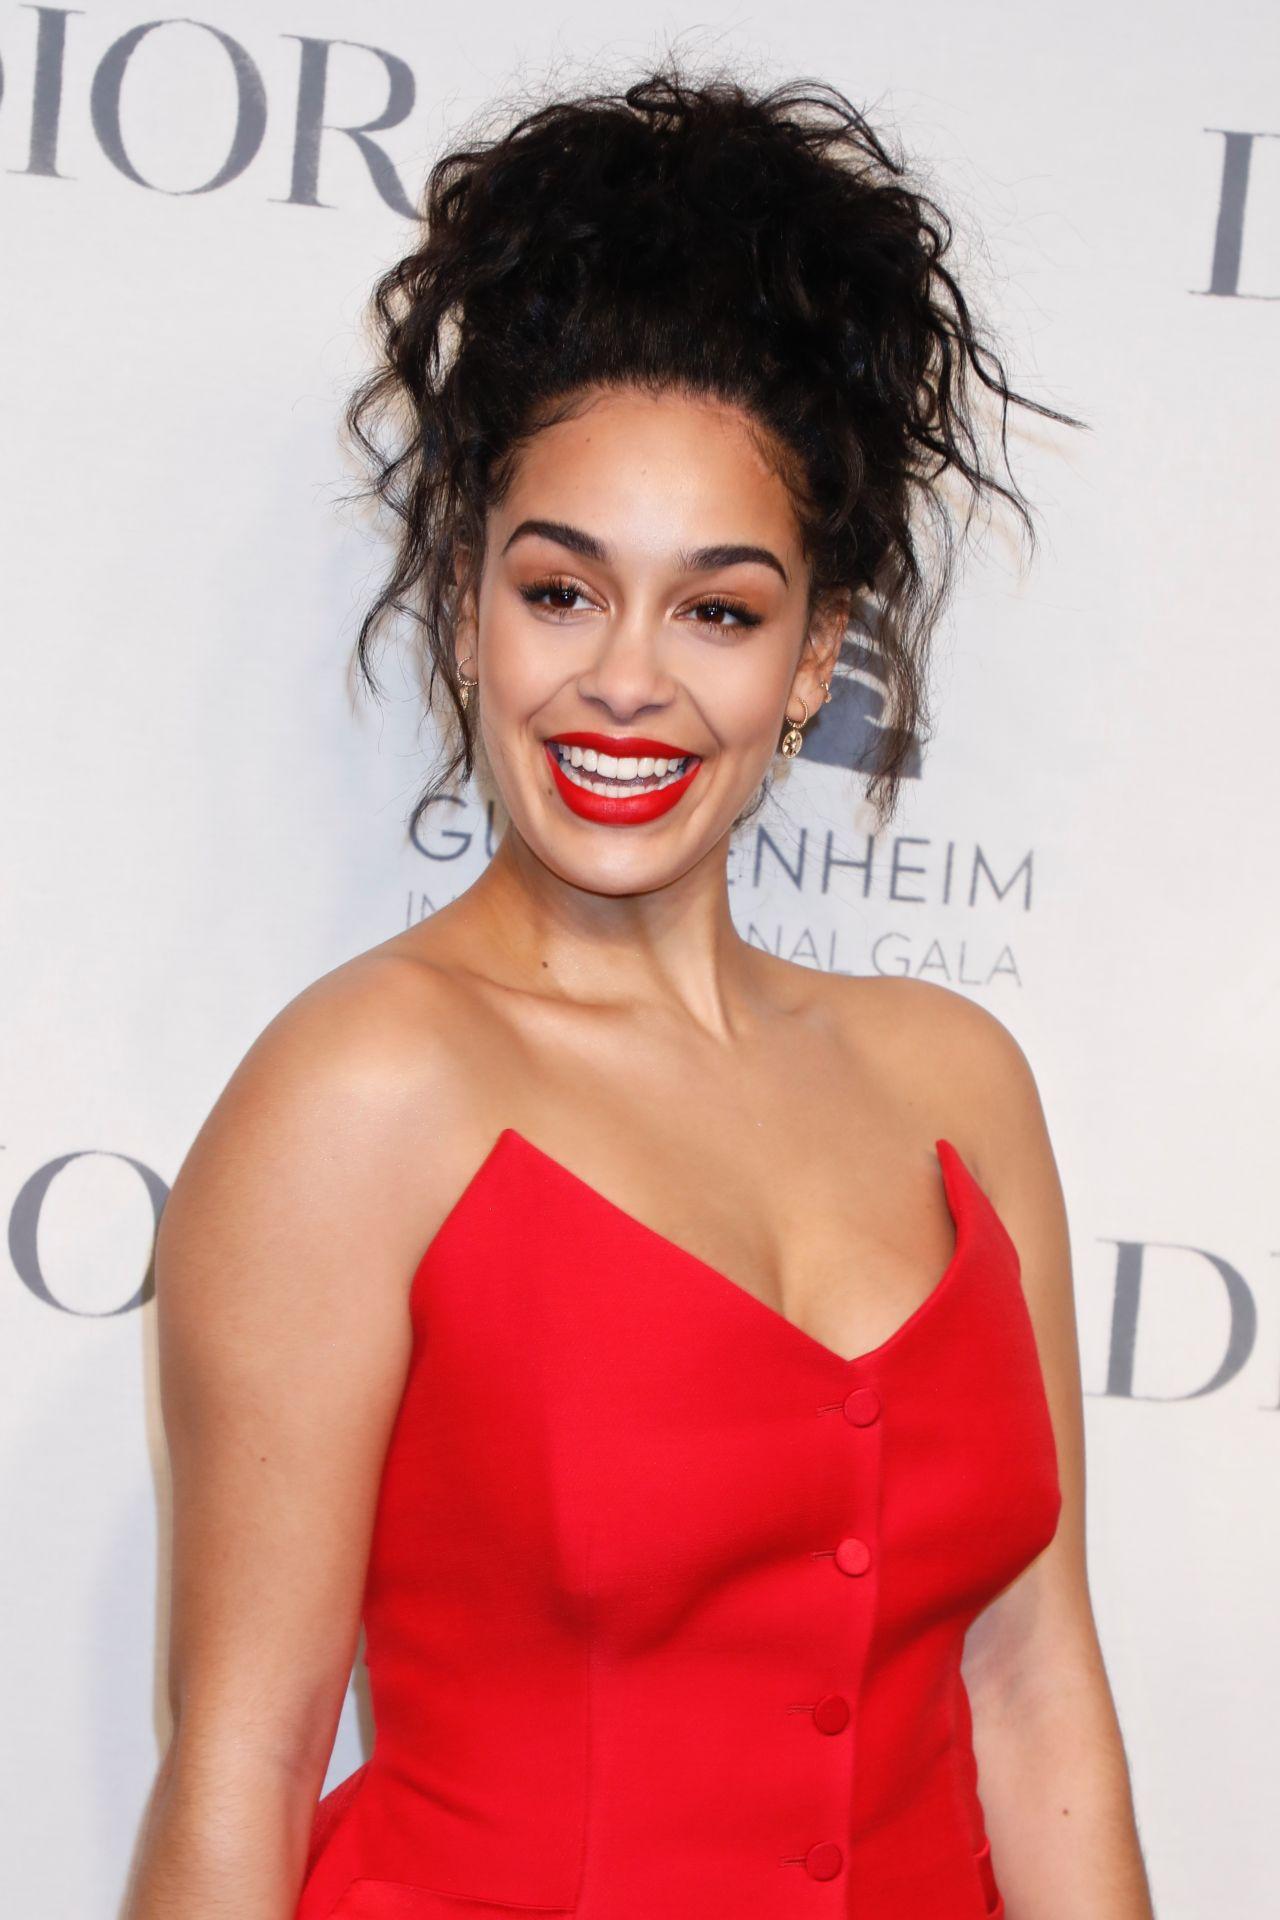 70+ Hot Pictures Of Jorja Smith Which Will Make Your Day 14